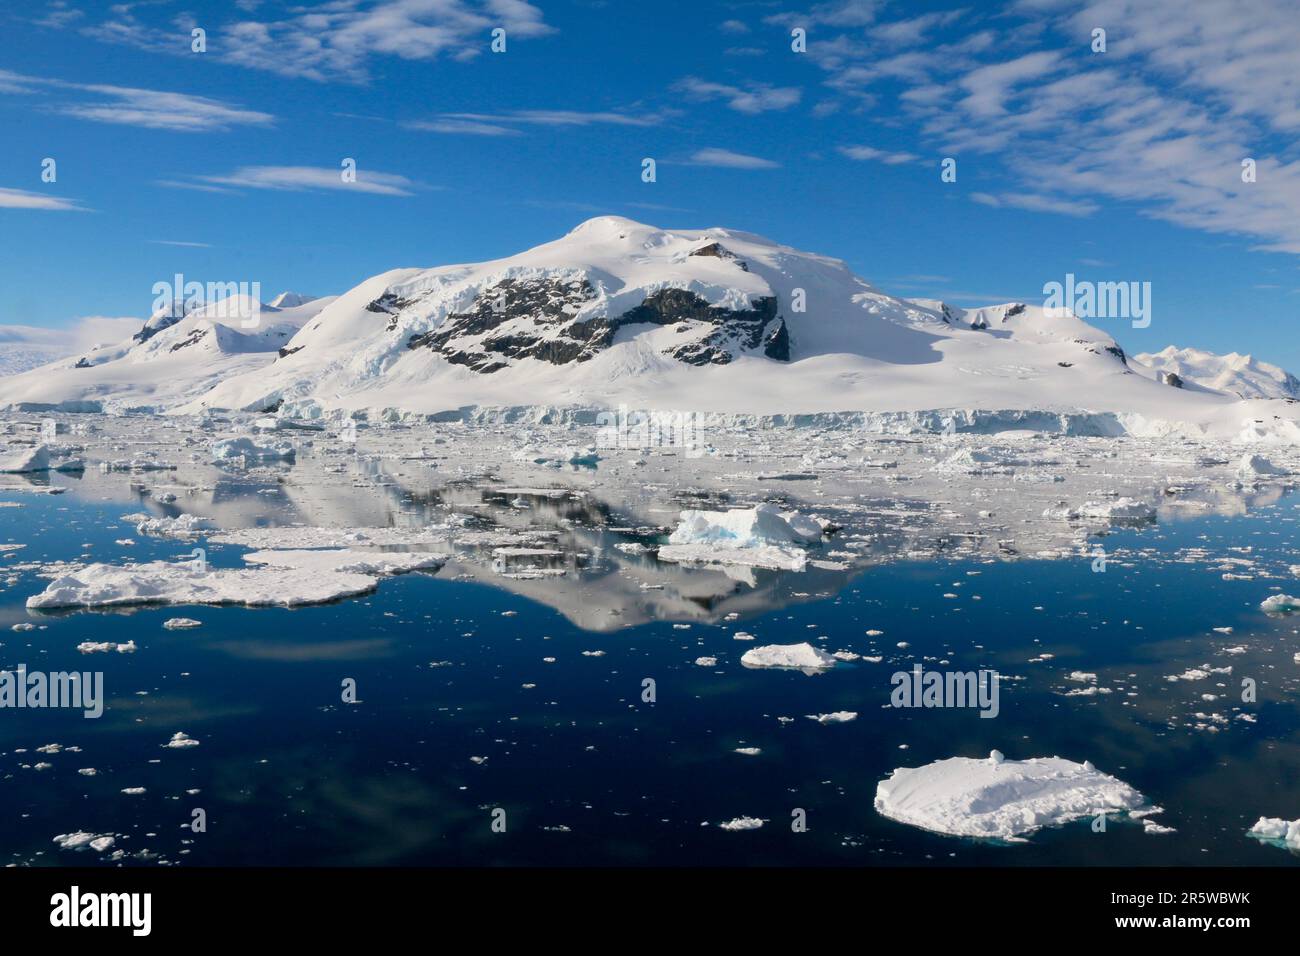 Glacial mountainscape featuring a pristine lake with a few ice cubes floating on its surface, framed by snow-capped peaks in the background Stock Photo